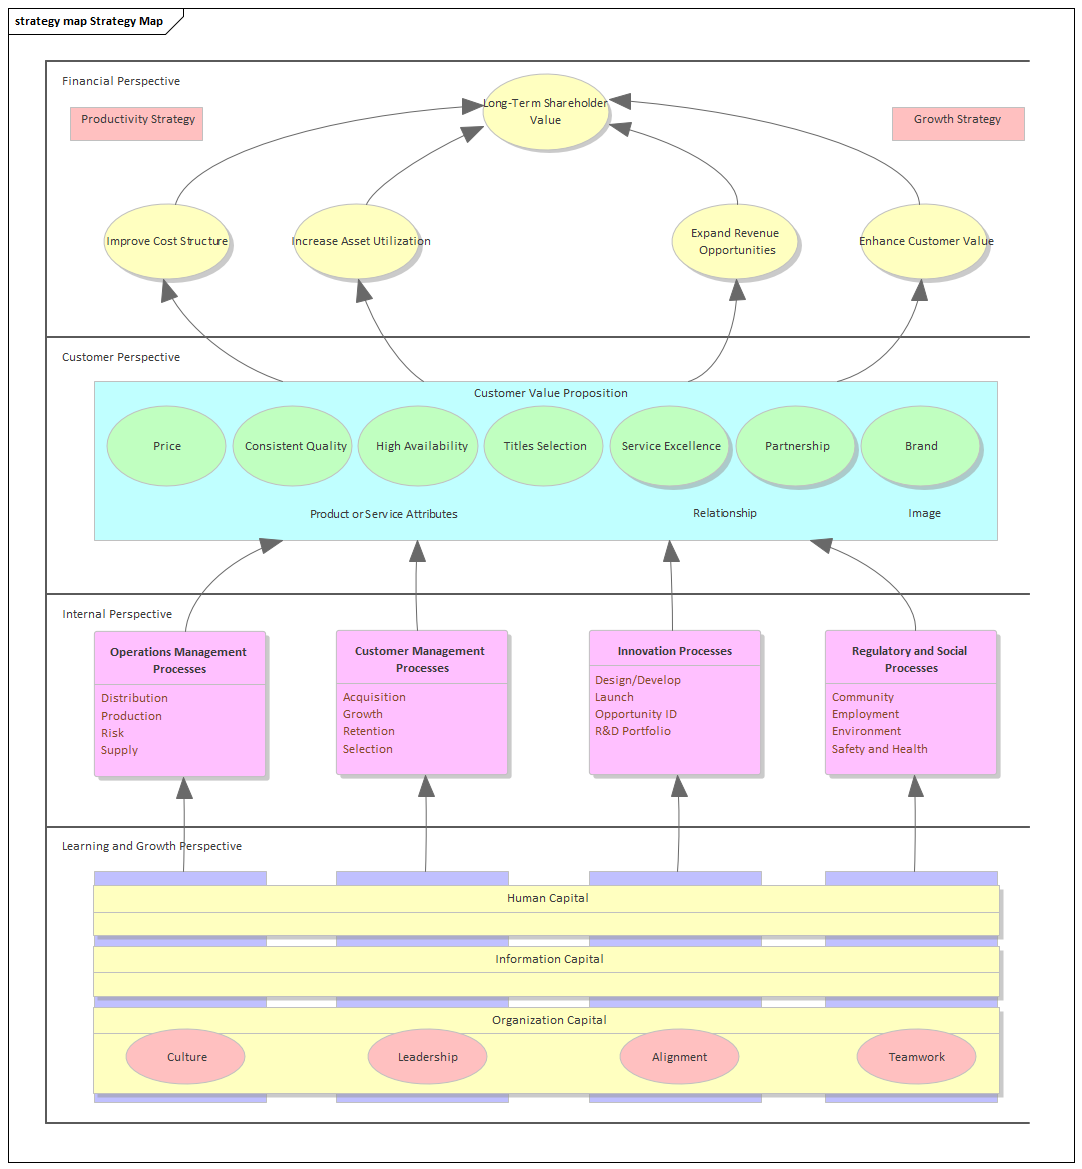 Business Analysis tool, the Strategy Map diagram in Sparx Systems Enterprise Architect